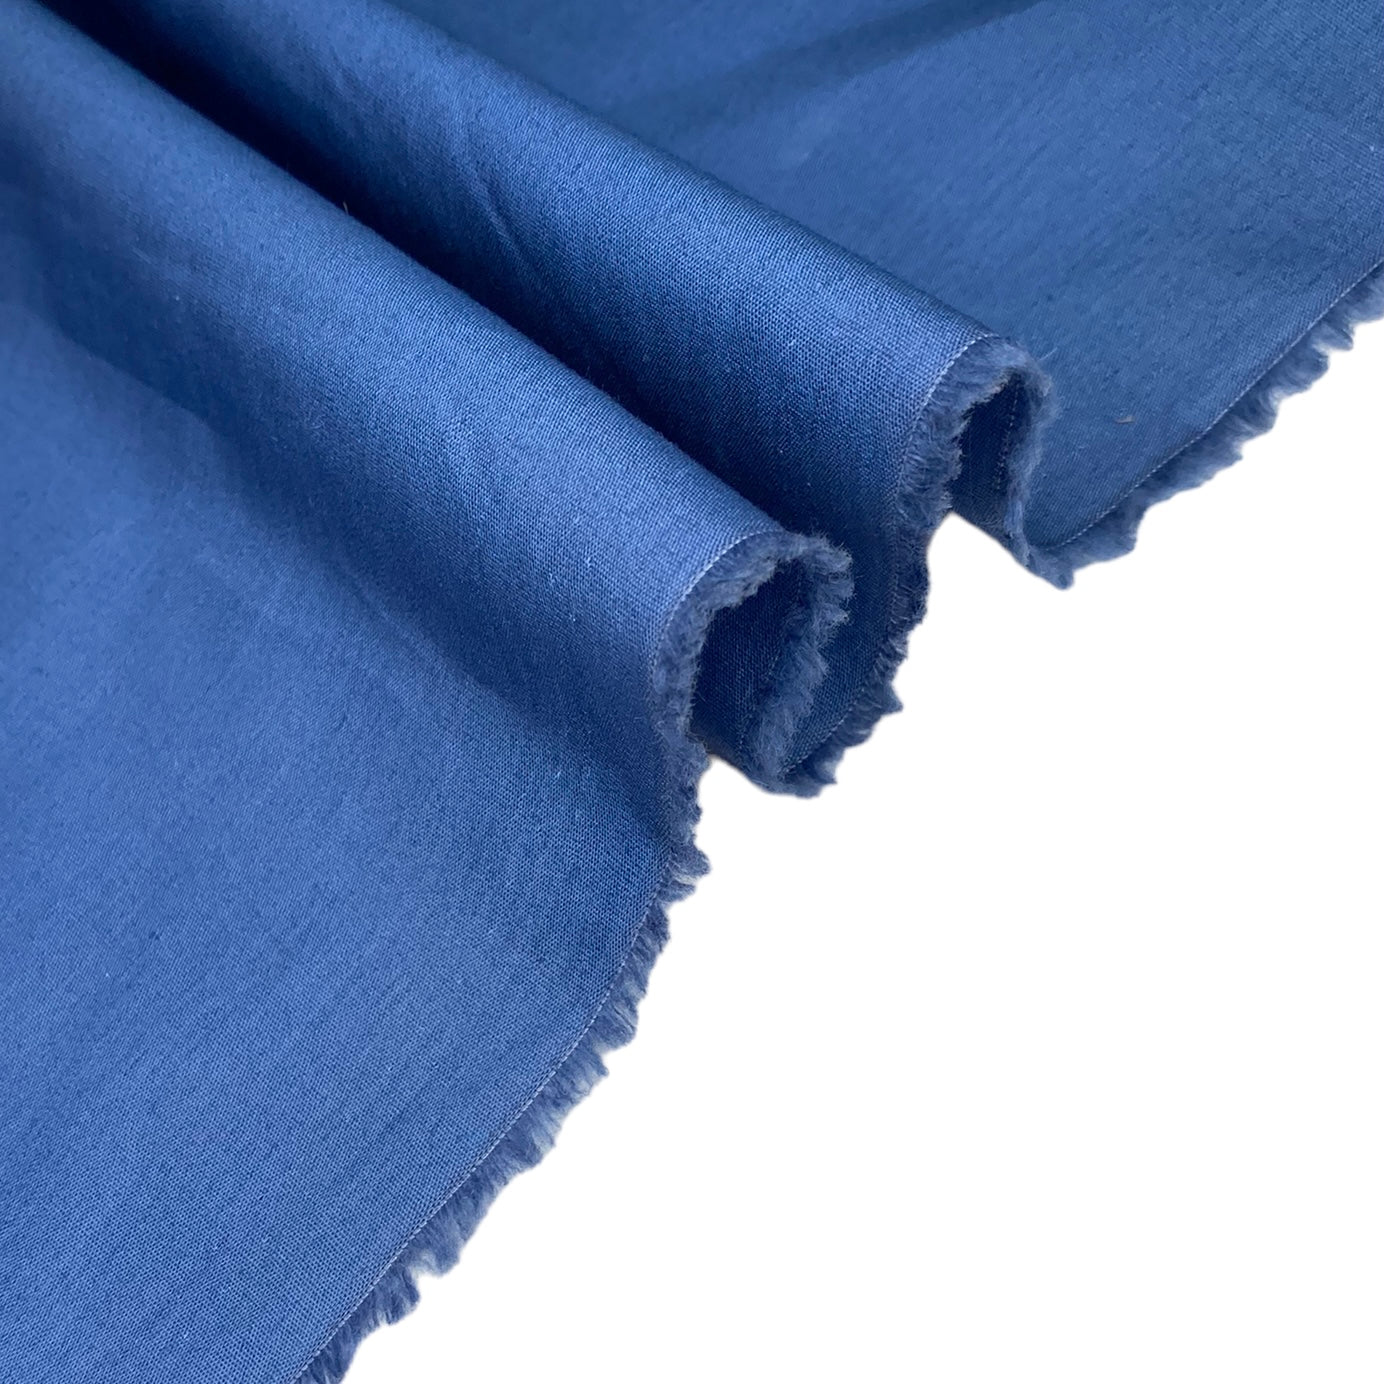 Polyester/Cotton Broadcloth - 60” - Blue